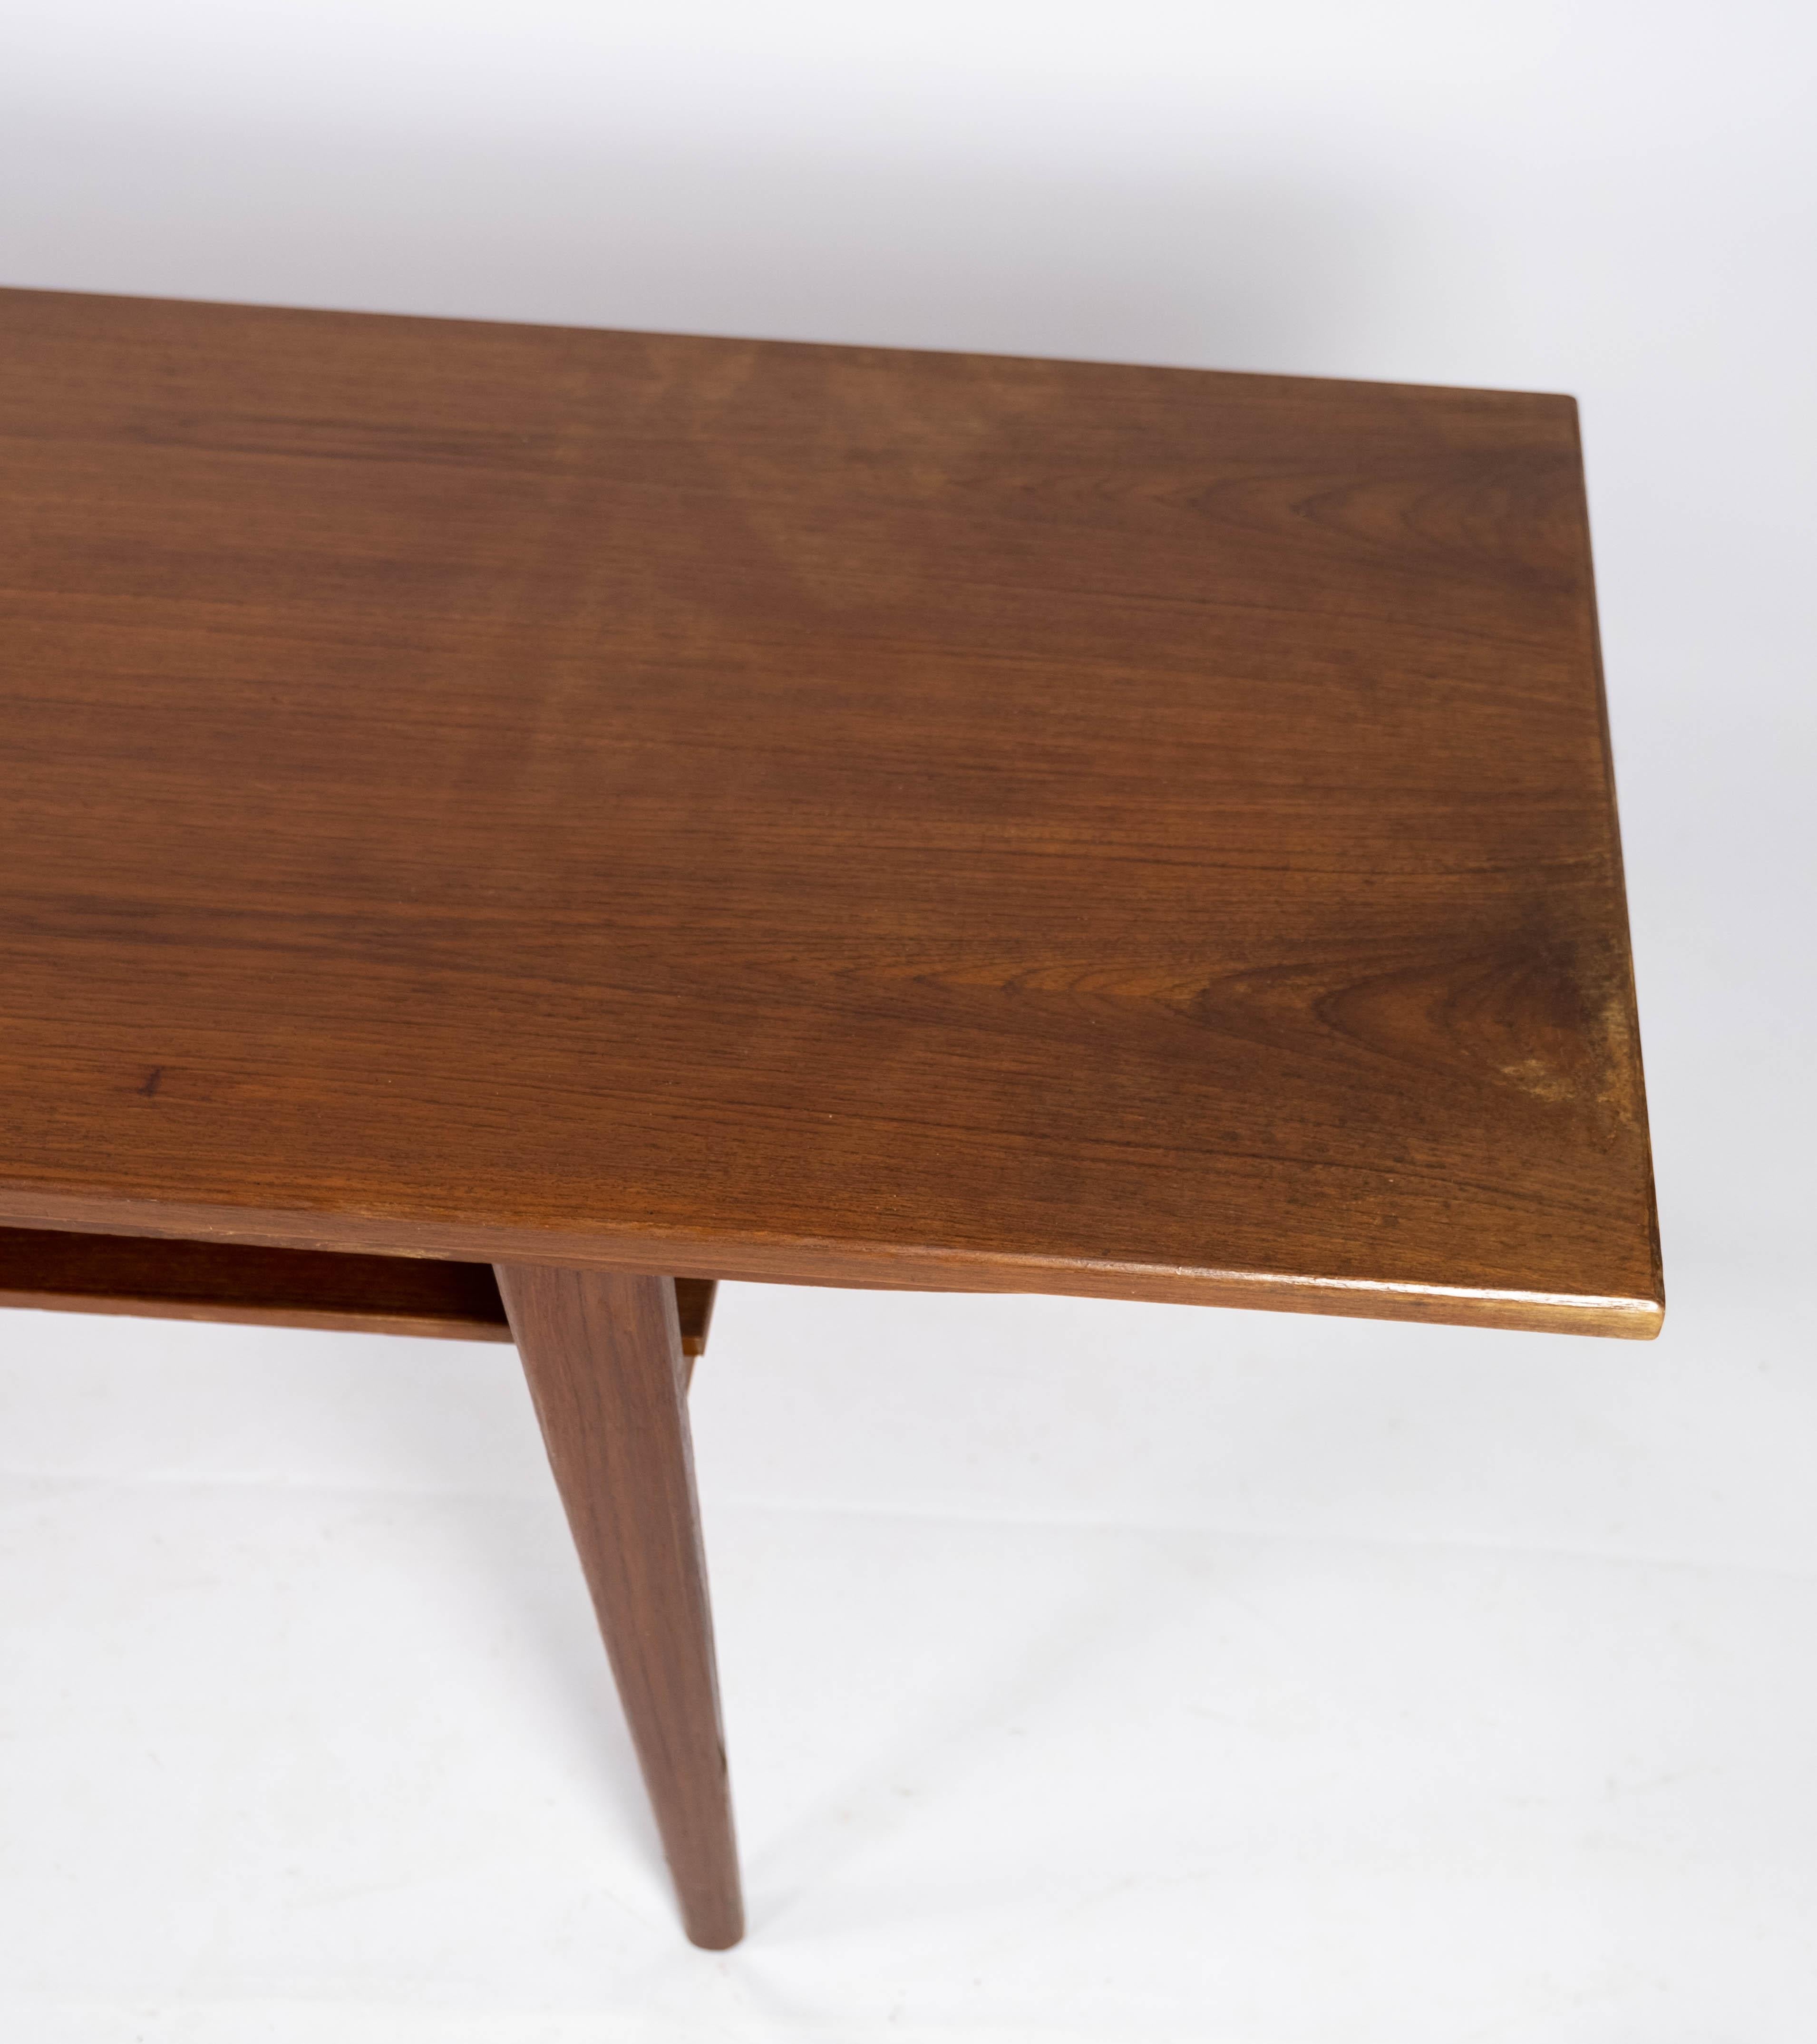 Mid-Century Modern Coffee Table Made In Teak With Shelf, Danish Design From 1960s For Sale